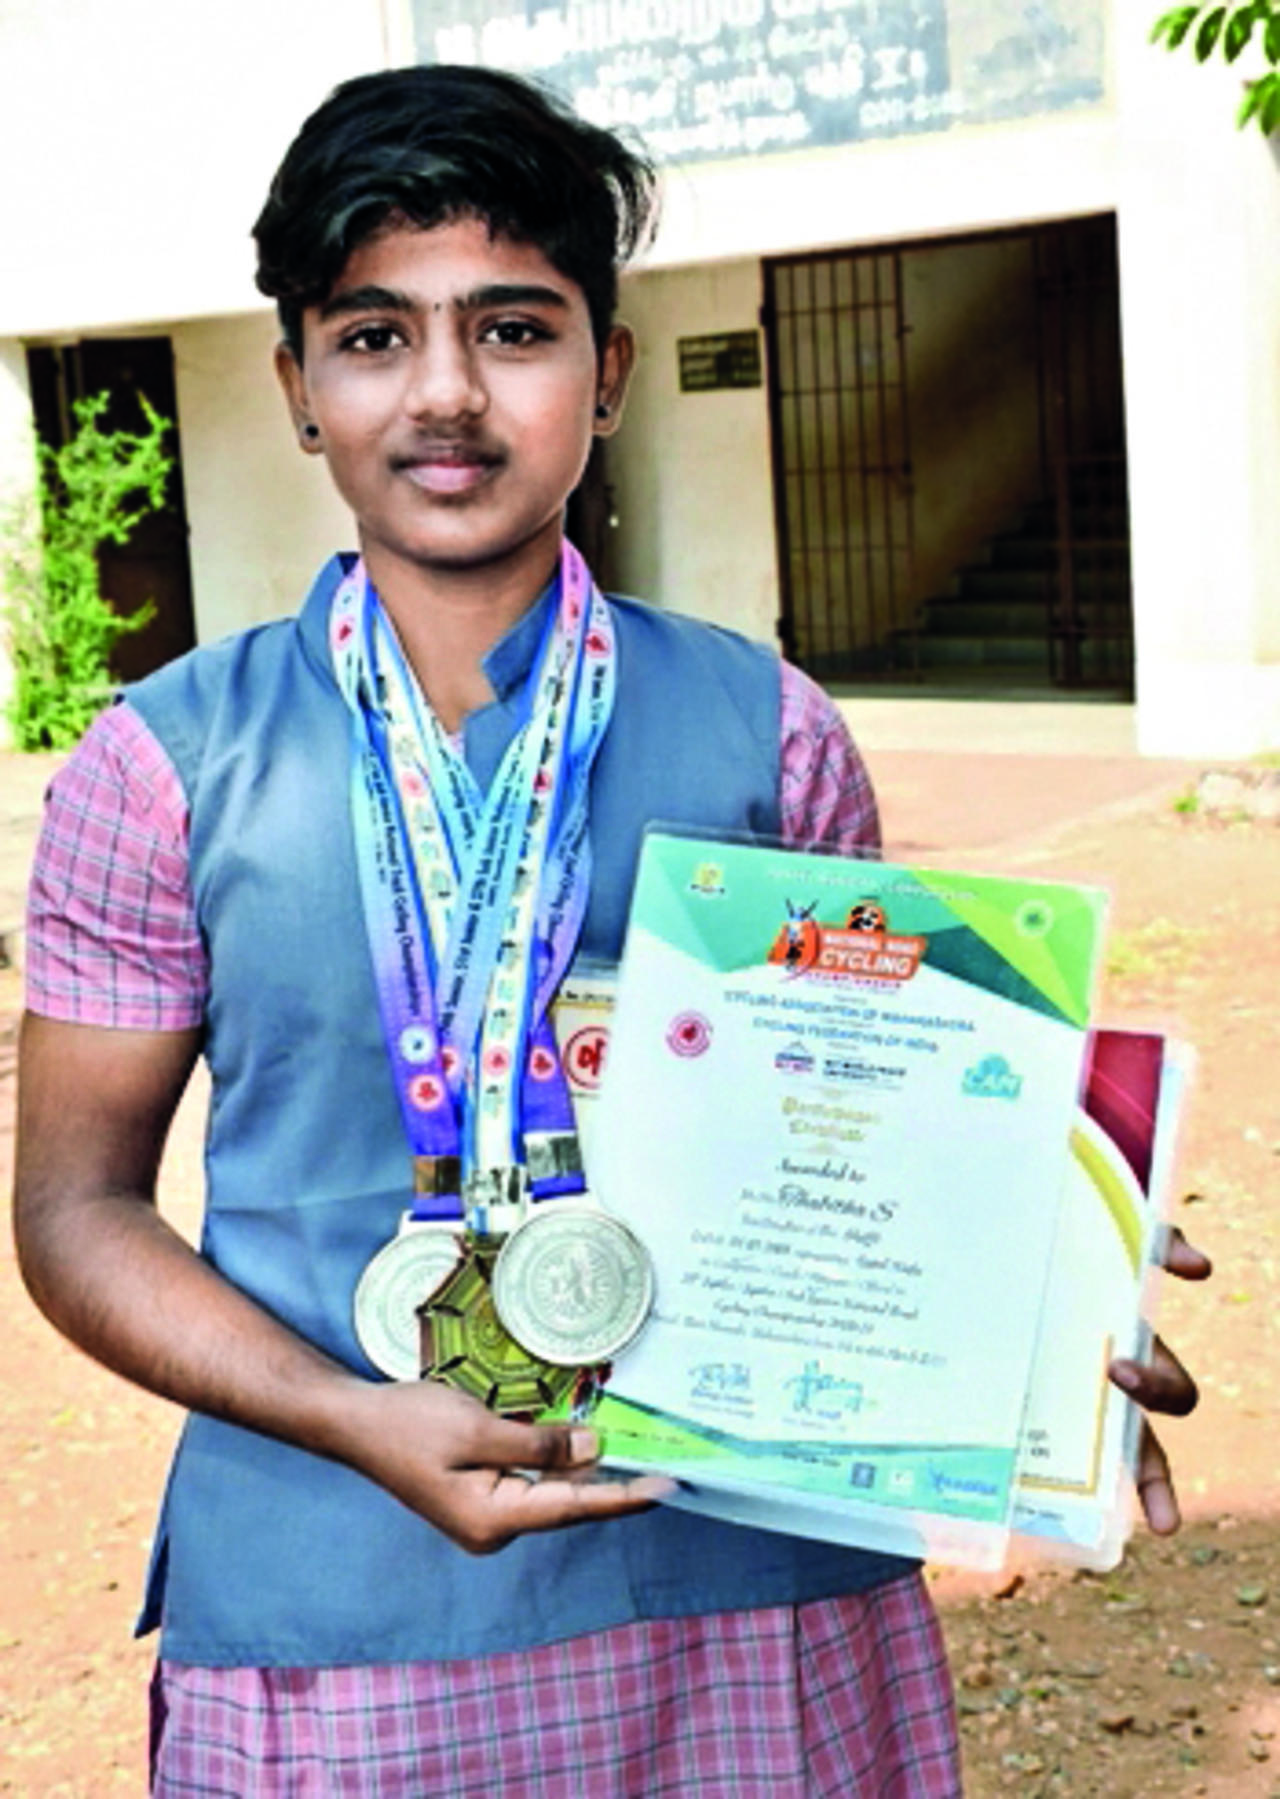 Can't Afford Own Racing Cyle, Yet Thabitha Wins Nat'l-level Gold |  Coimbatore News - Times of India